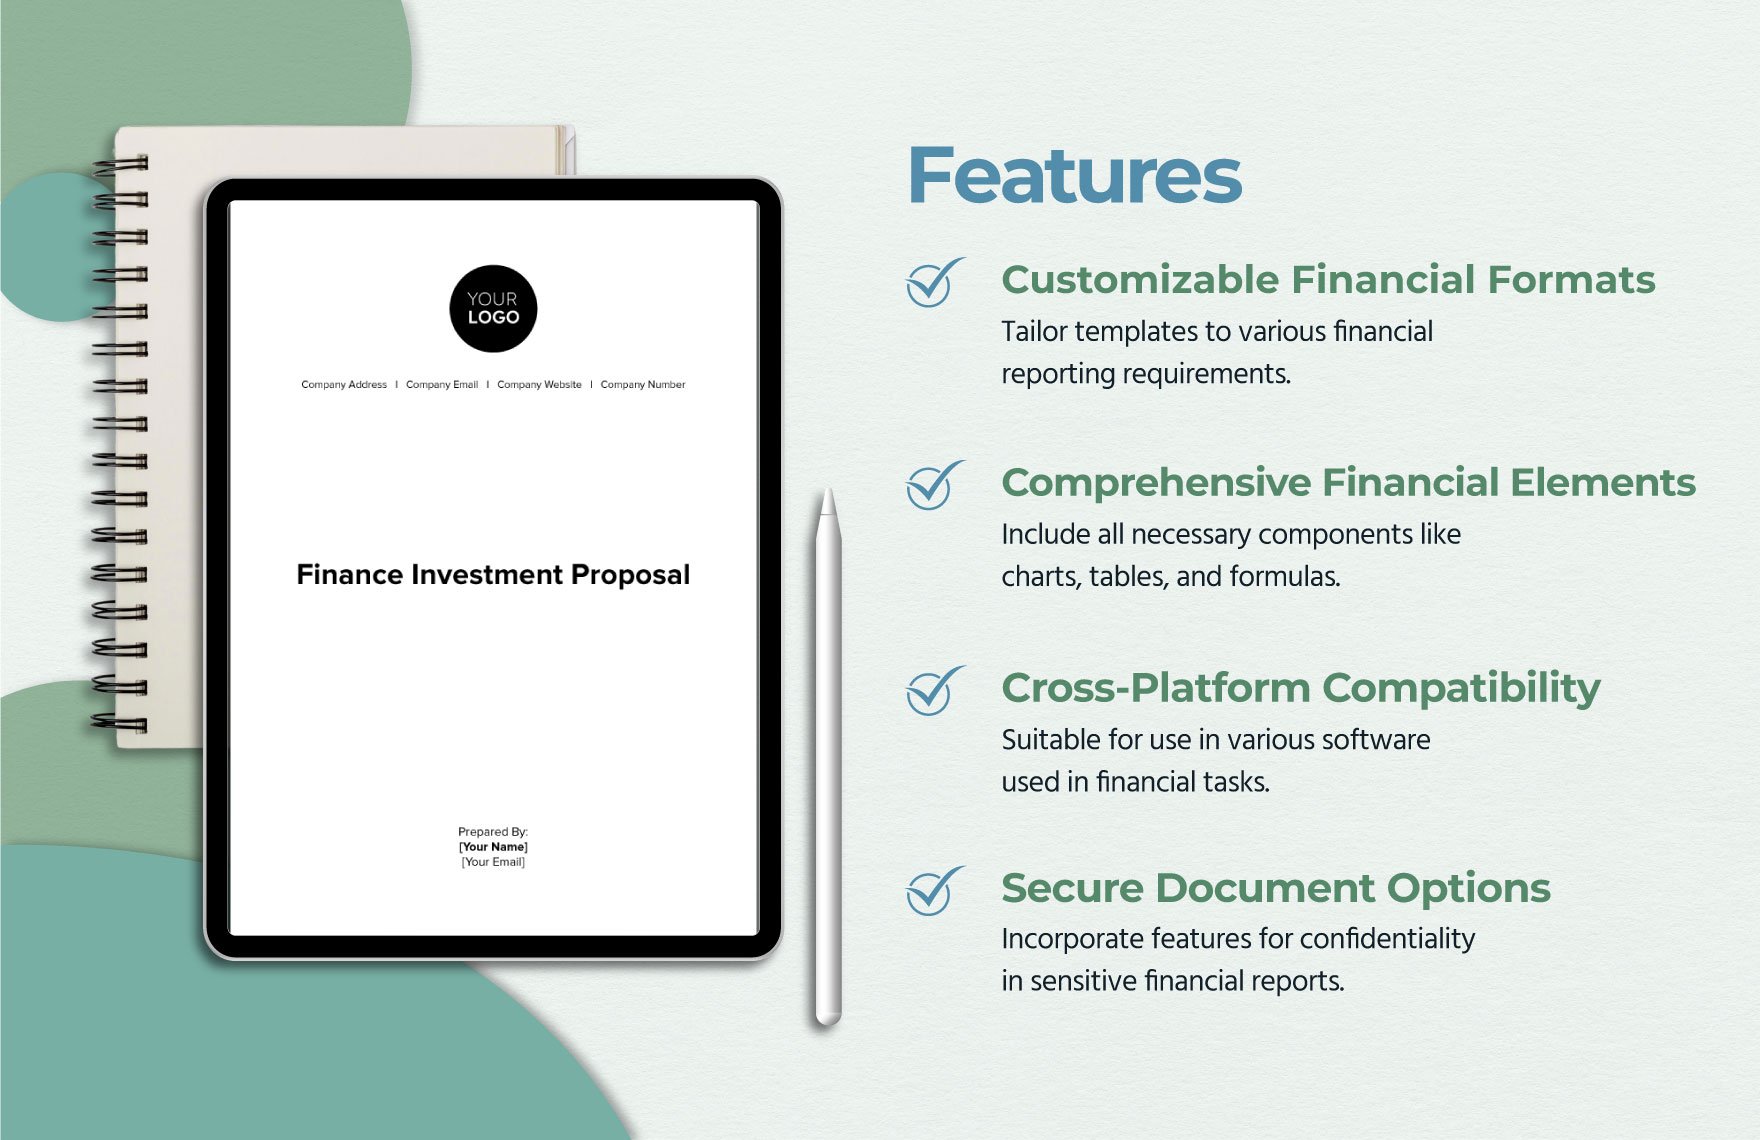 Finance Investment Proposal Template